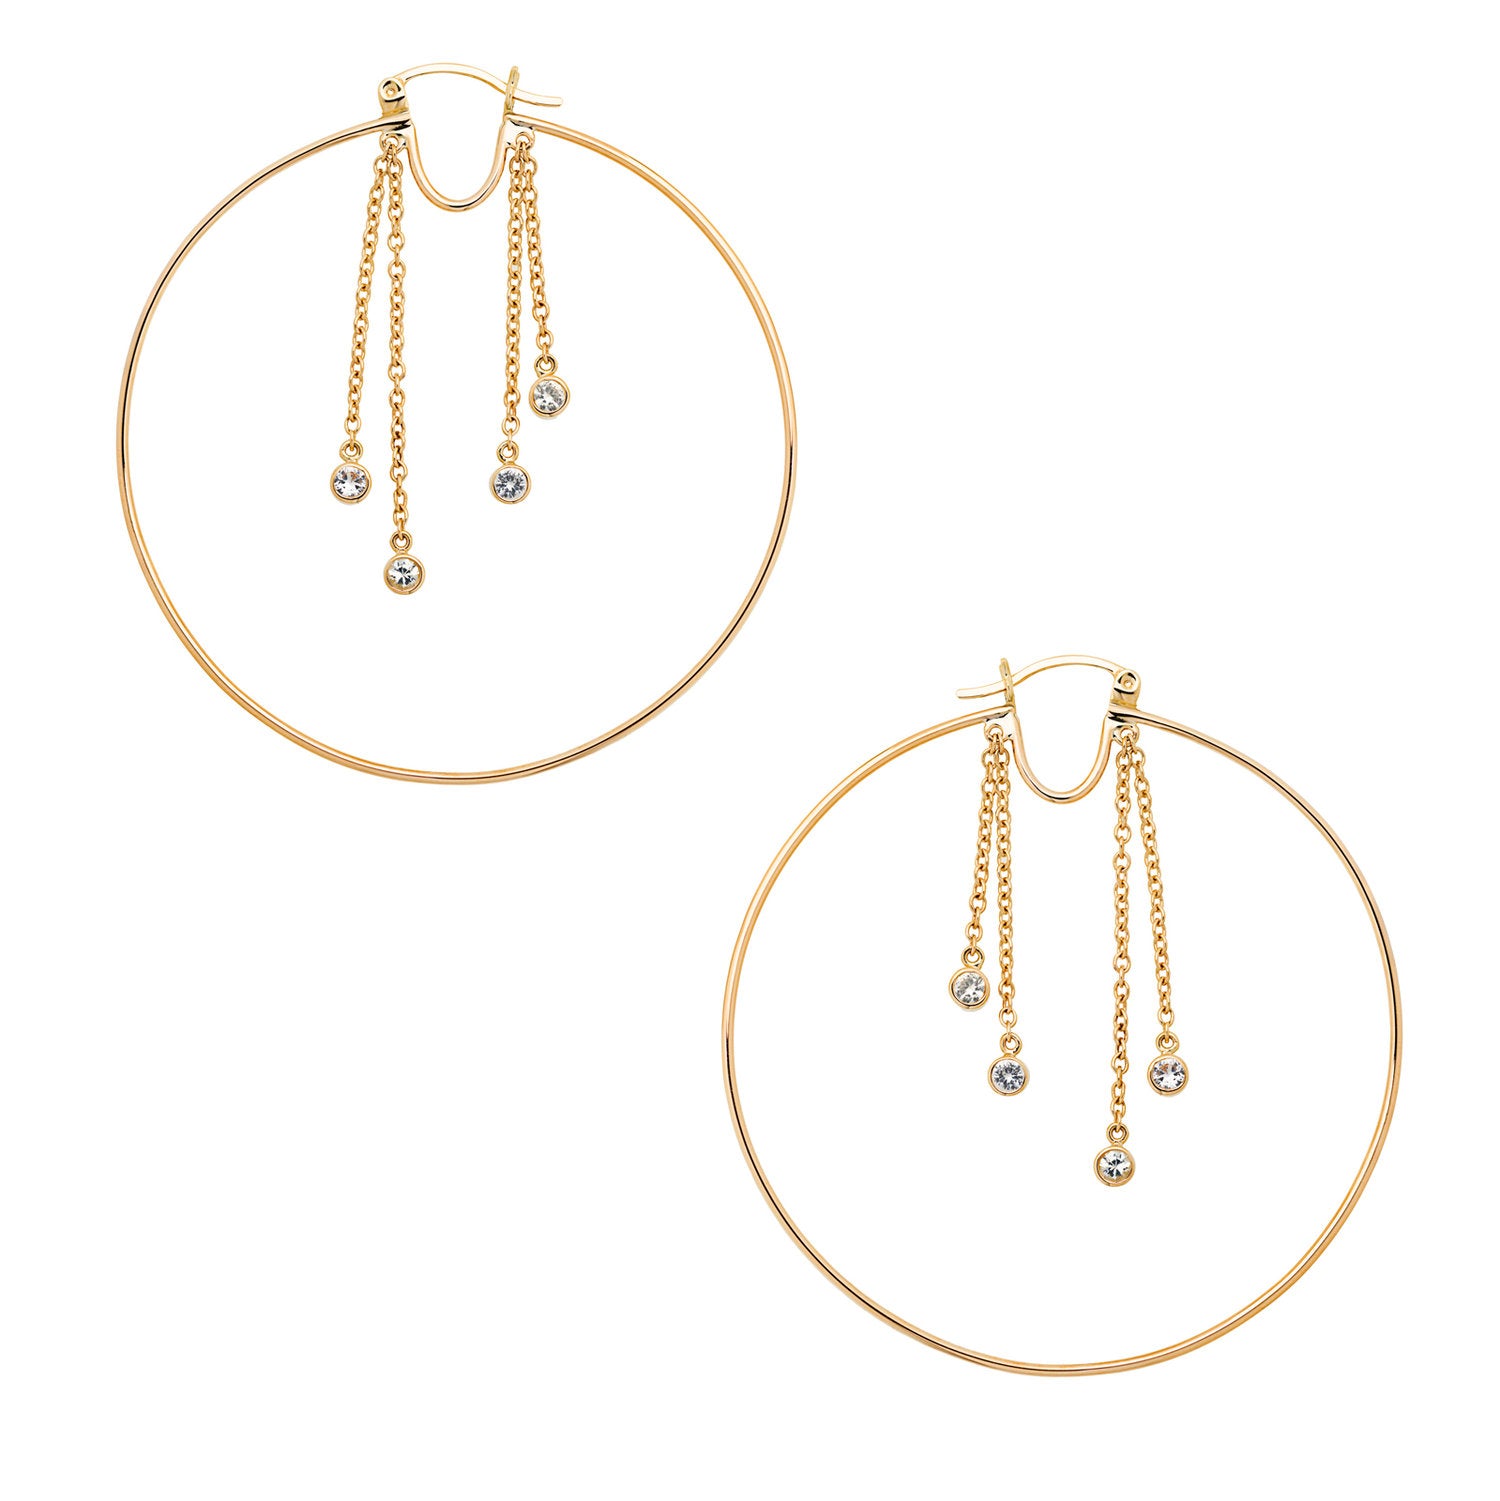 Irini 14k gold large hoop with chain details, bezel hugged white sapphires, the update to class hoop earrings, made in NYC a must have